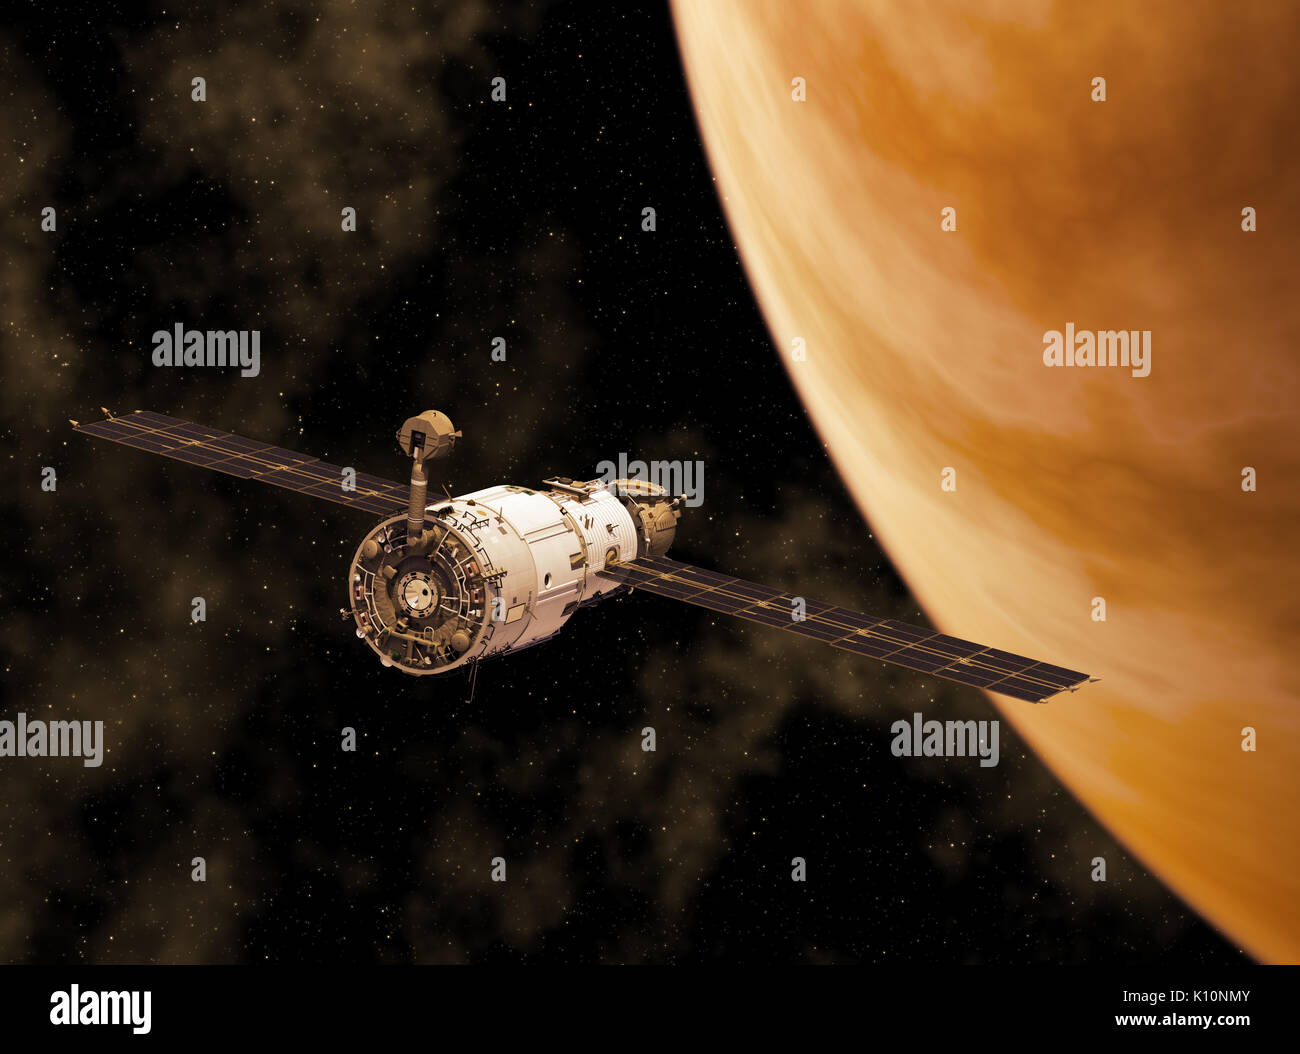 Space Station Orbiting Yellow Planet. 3D Illustration. Stock Photo